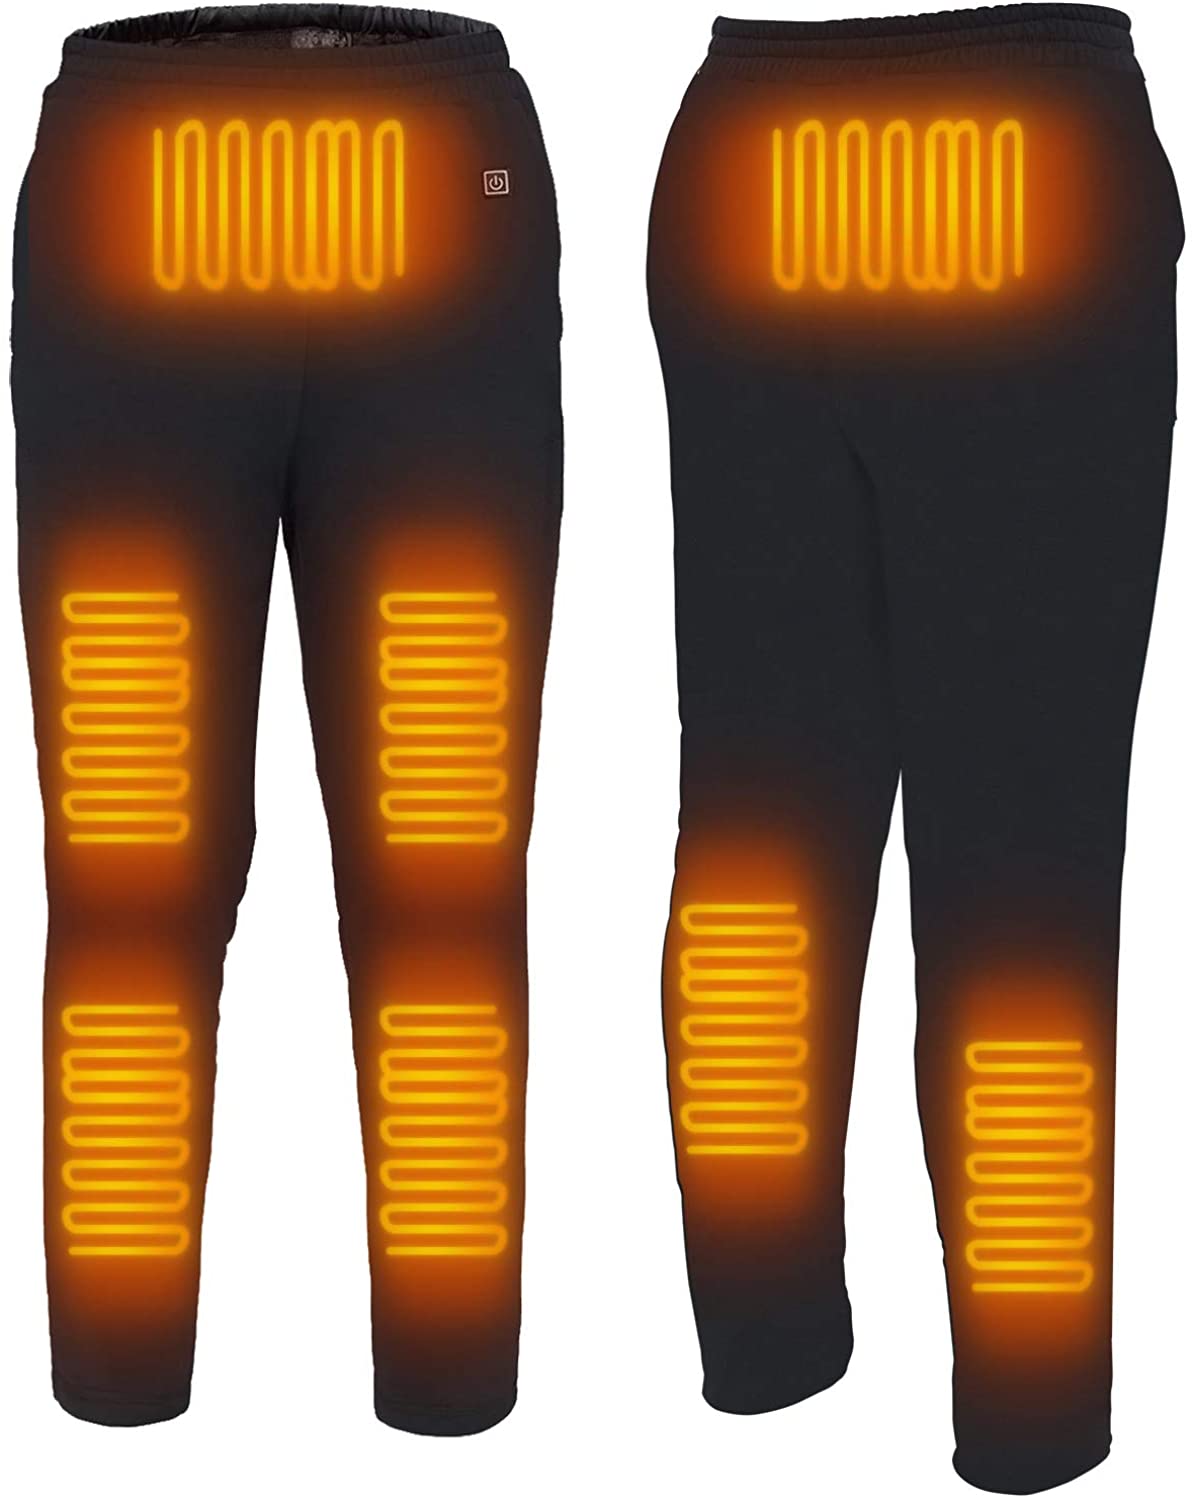 Heated Pants USB 5V Electric Heating Pants for Men Women Outdoor Winter Heating Trouser, 8 Heating Zone, No Battery Include - Home Decor Gifts and More